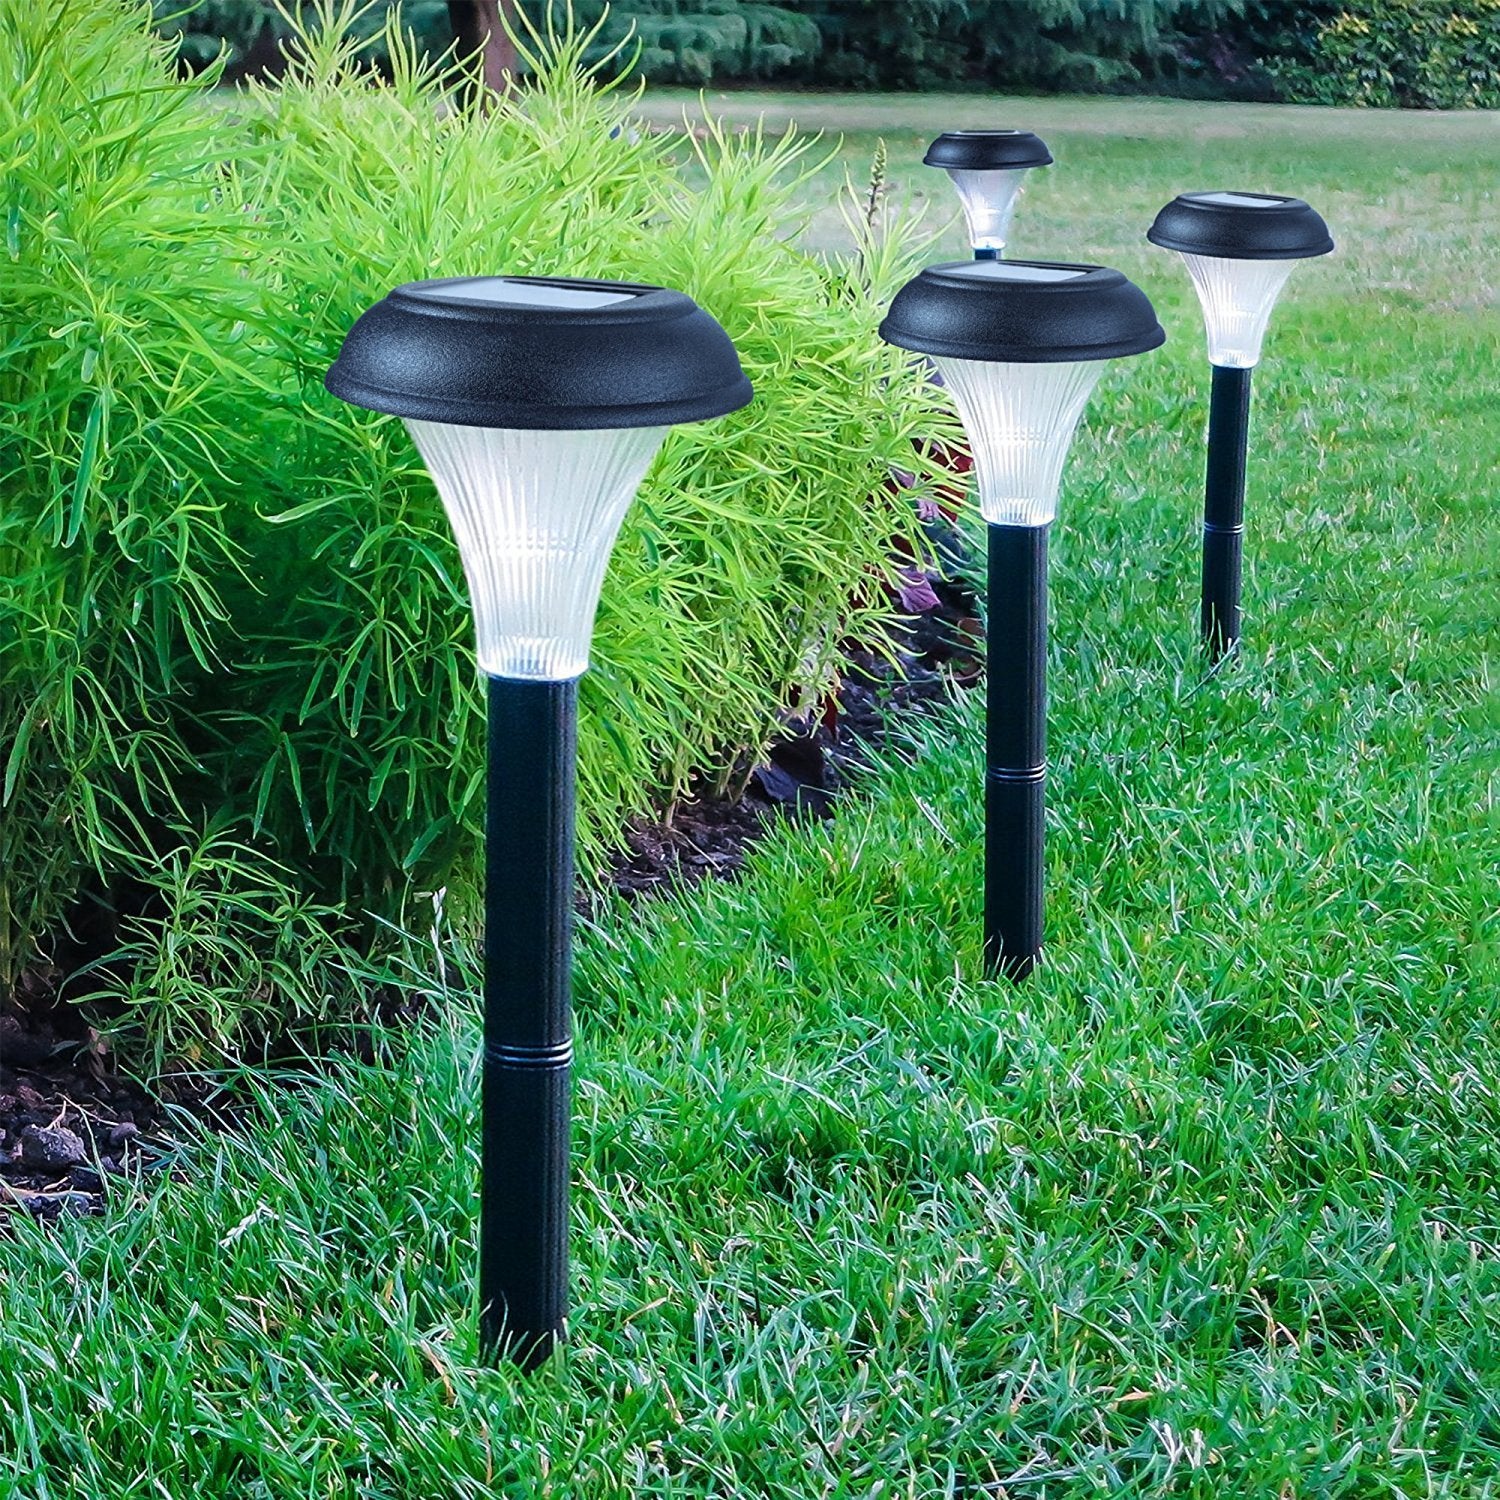 24 Incredible solar Led Landscape Lighting - Home, Family, Style and Art Ideas